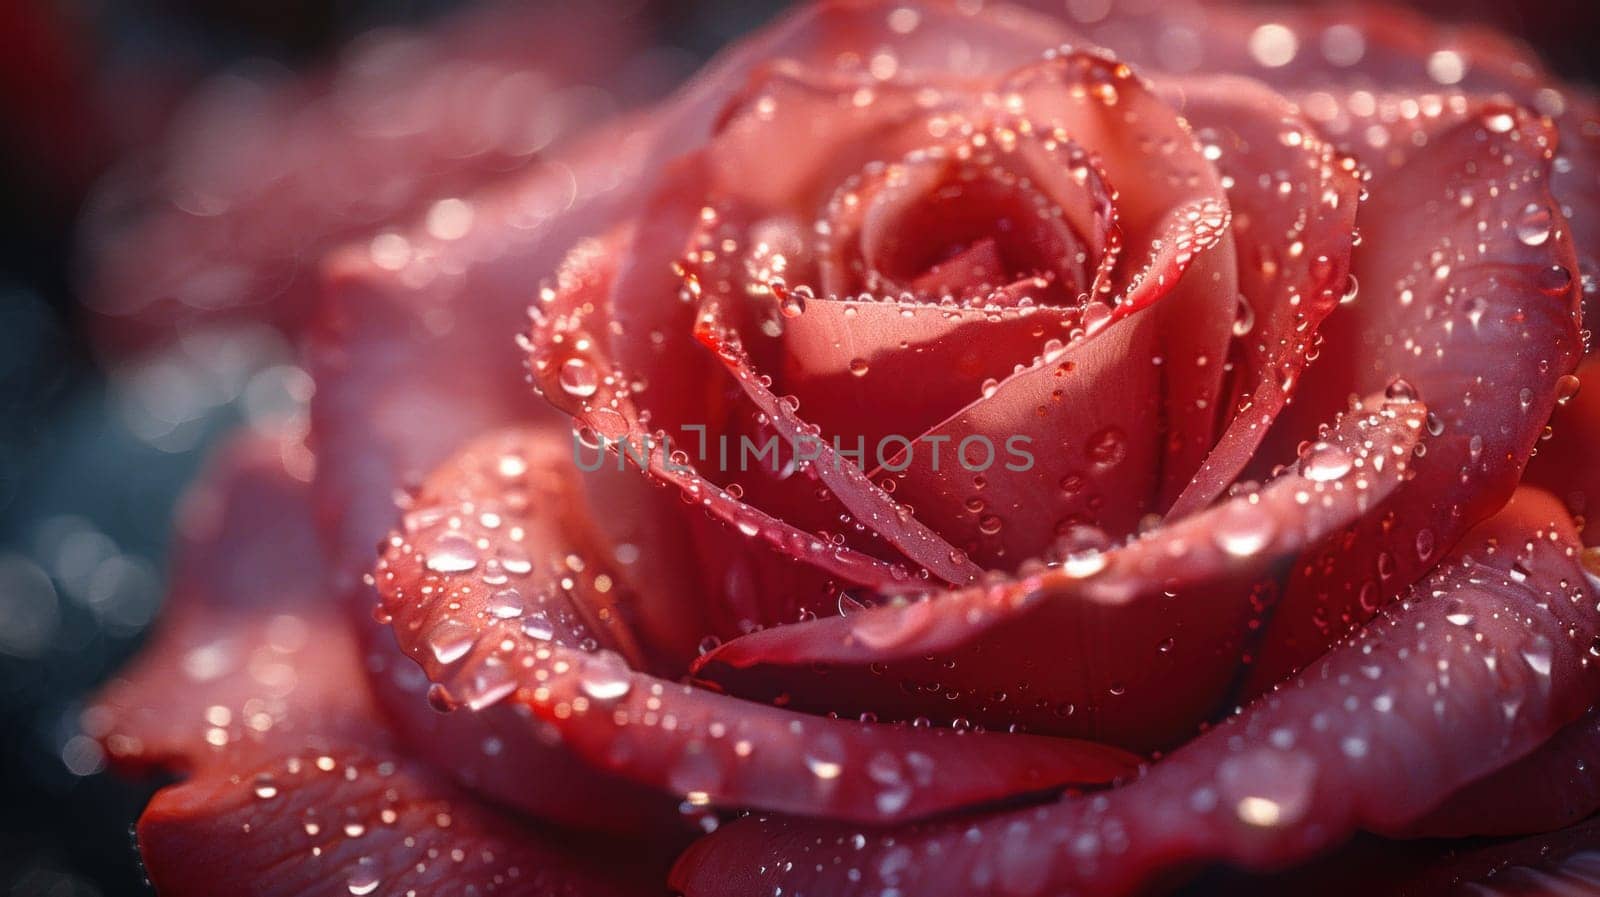 Red Rose With Water Droplets by but_photo